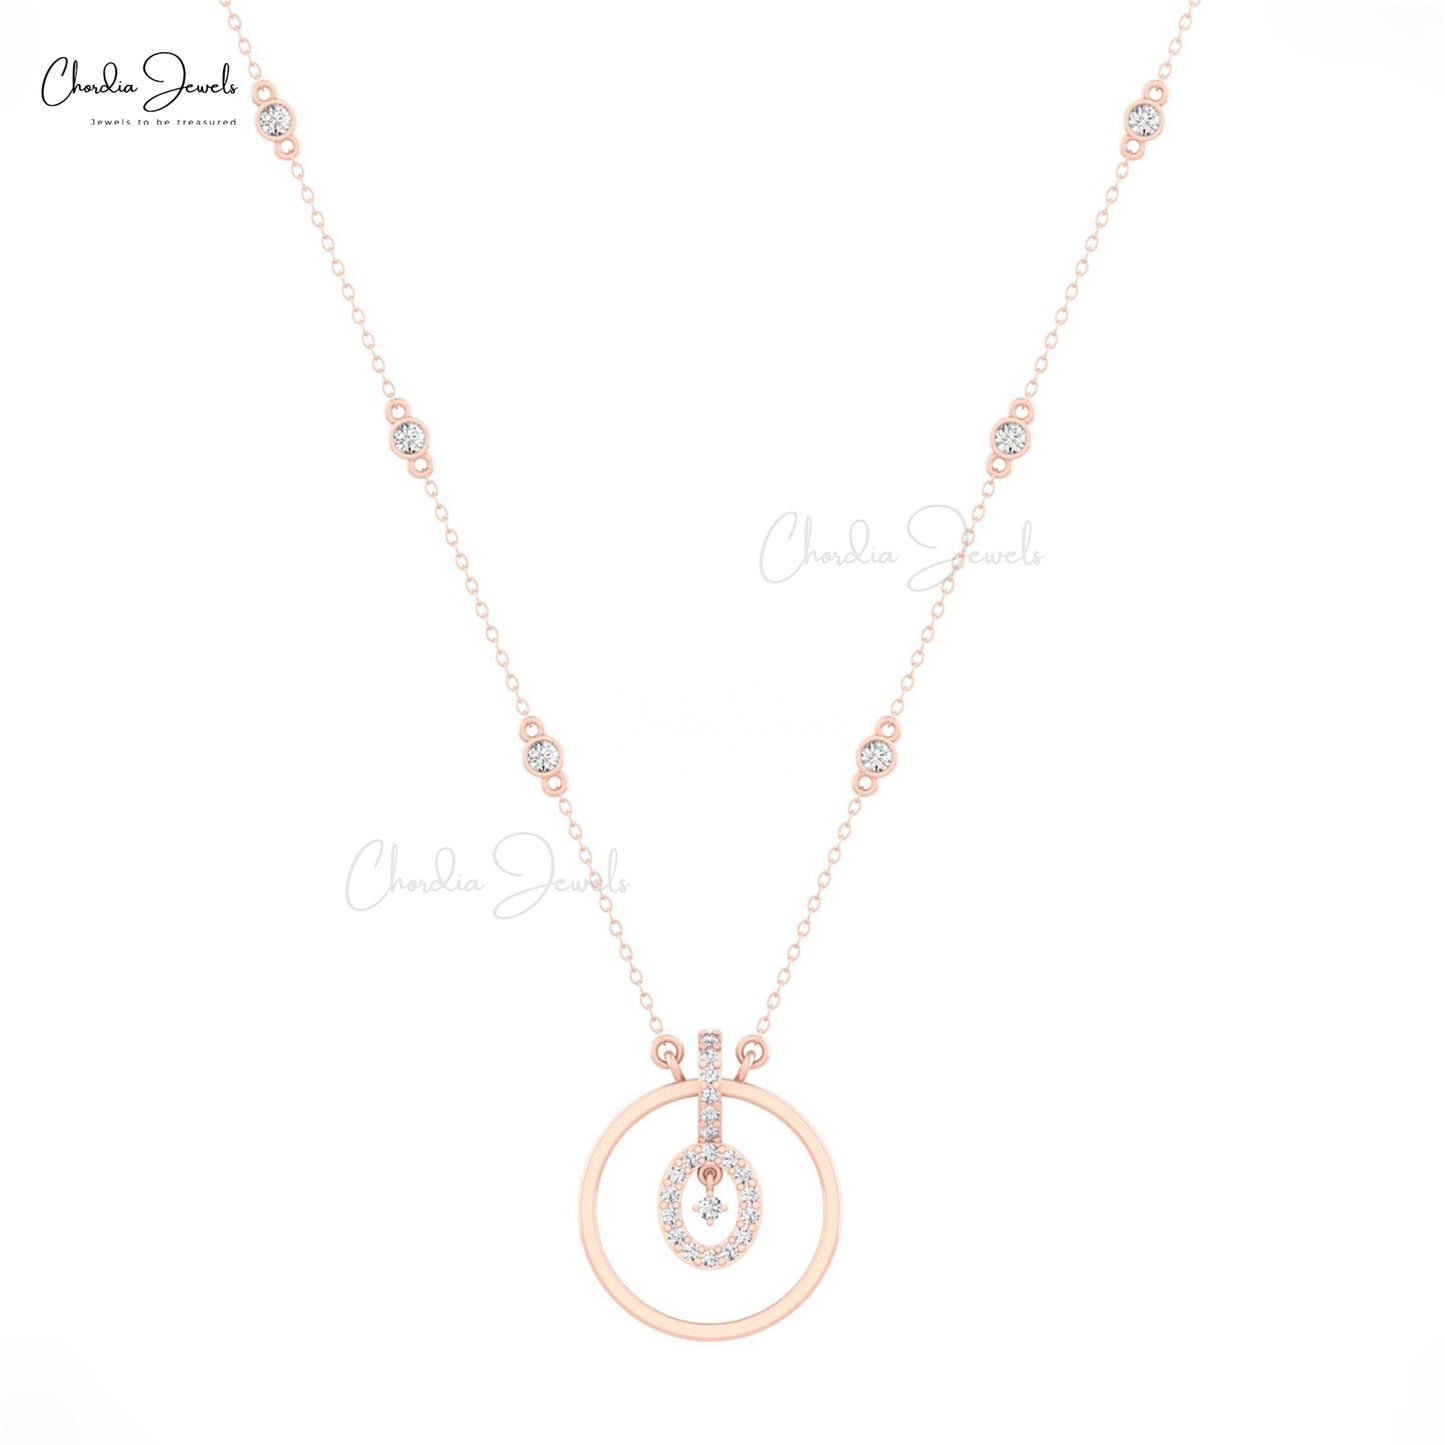 Sparkling 0.51ct White Diamond Eternity Necklace 14k Solid Gold Cable Chain Dainty Necklace